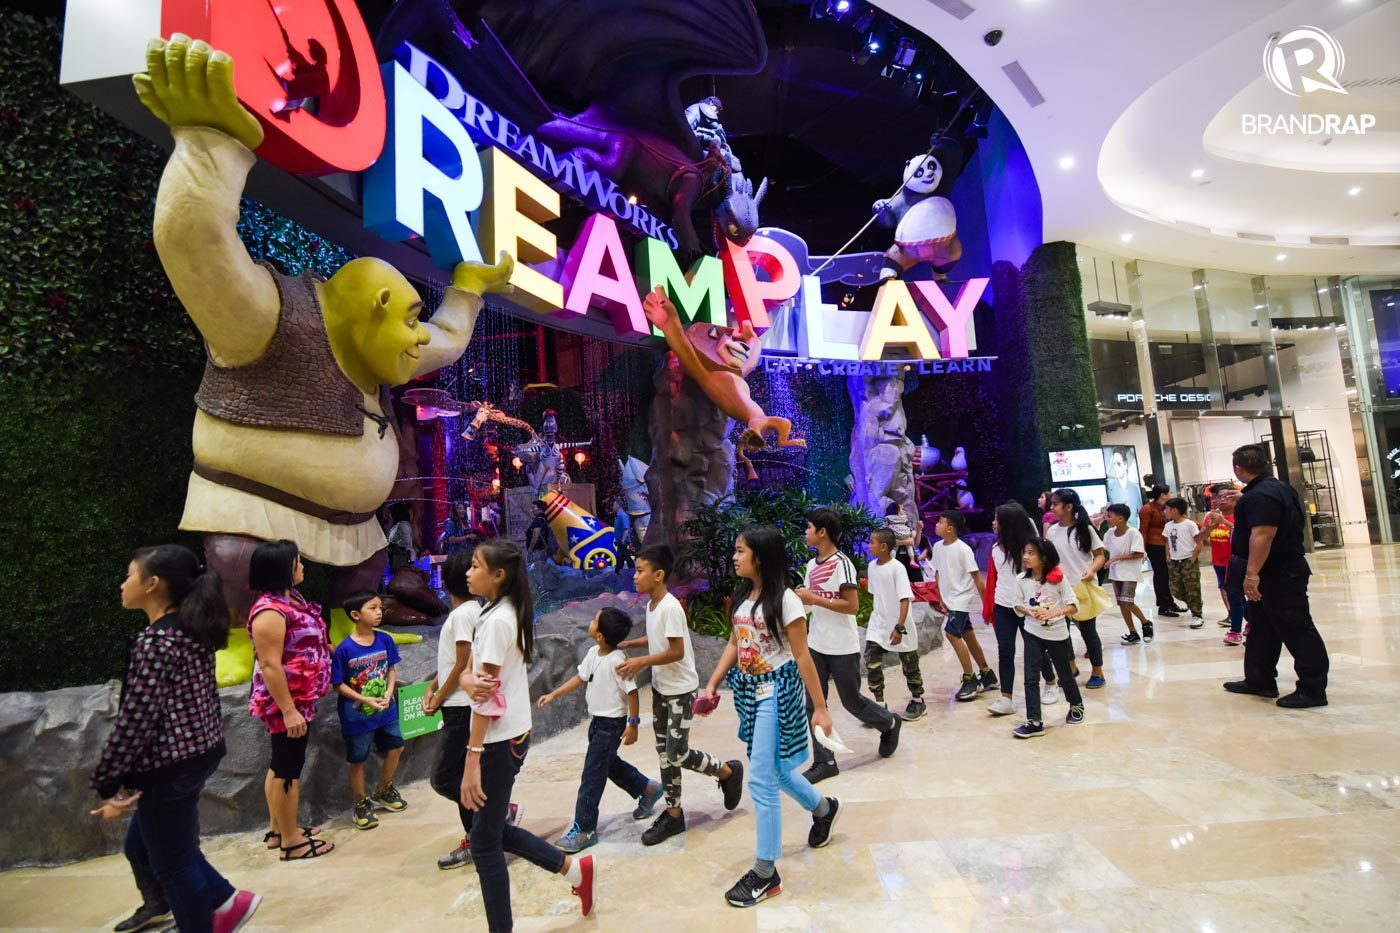 PLAYTIME. The kids get their first glimpse of DreamPlay, where fun, food, and games awaited them 